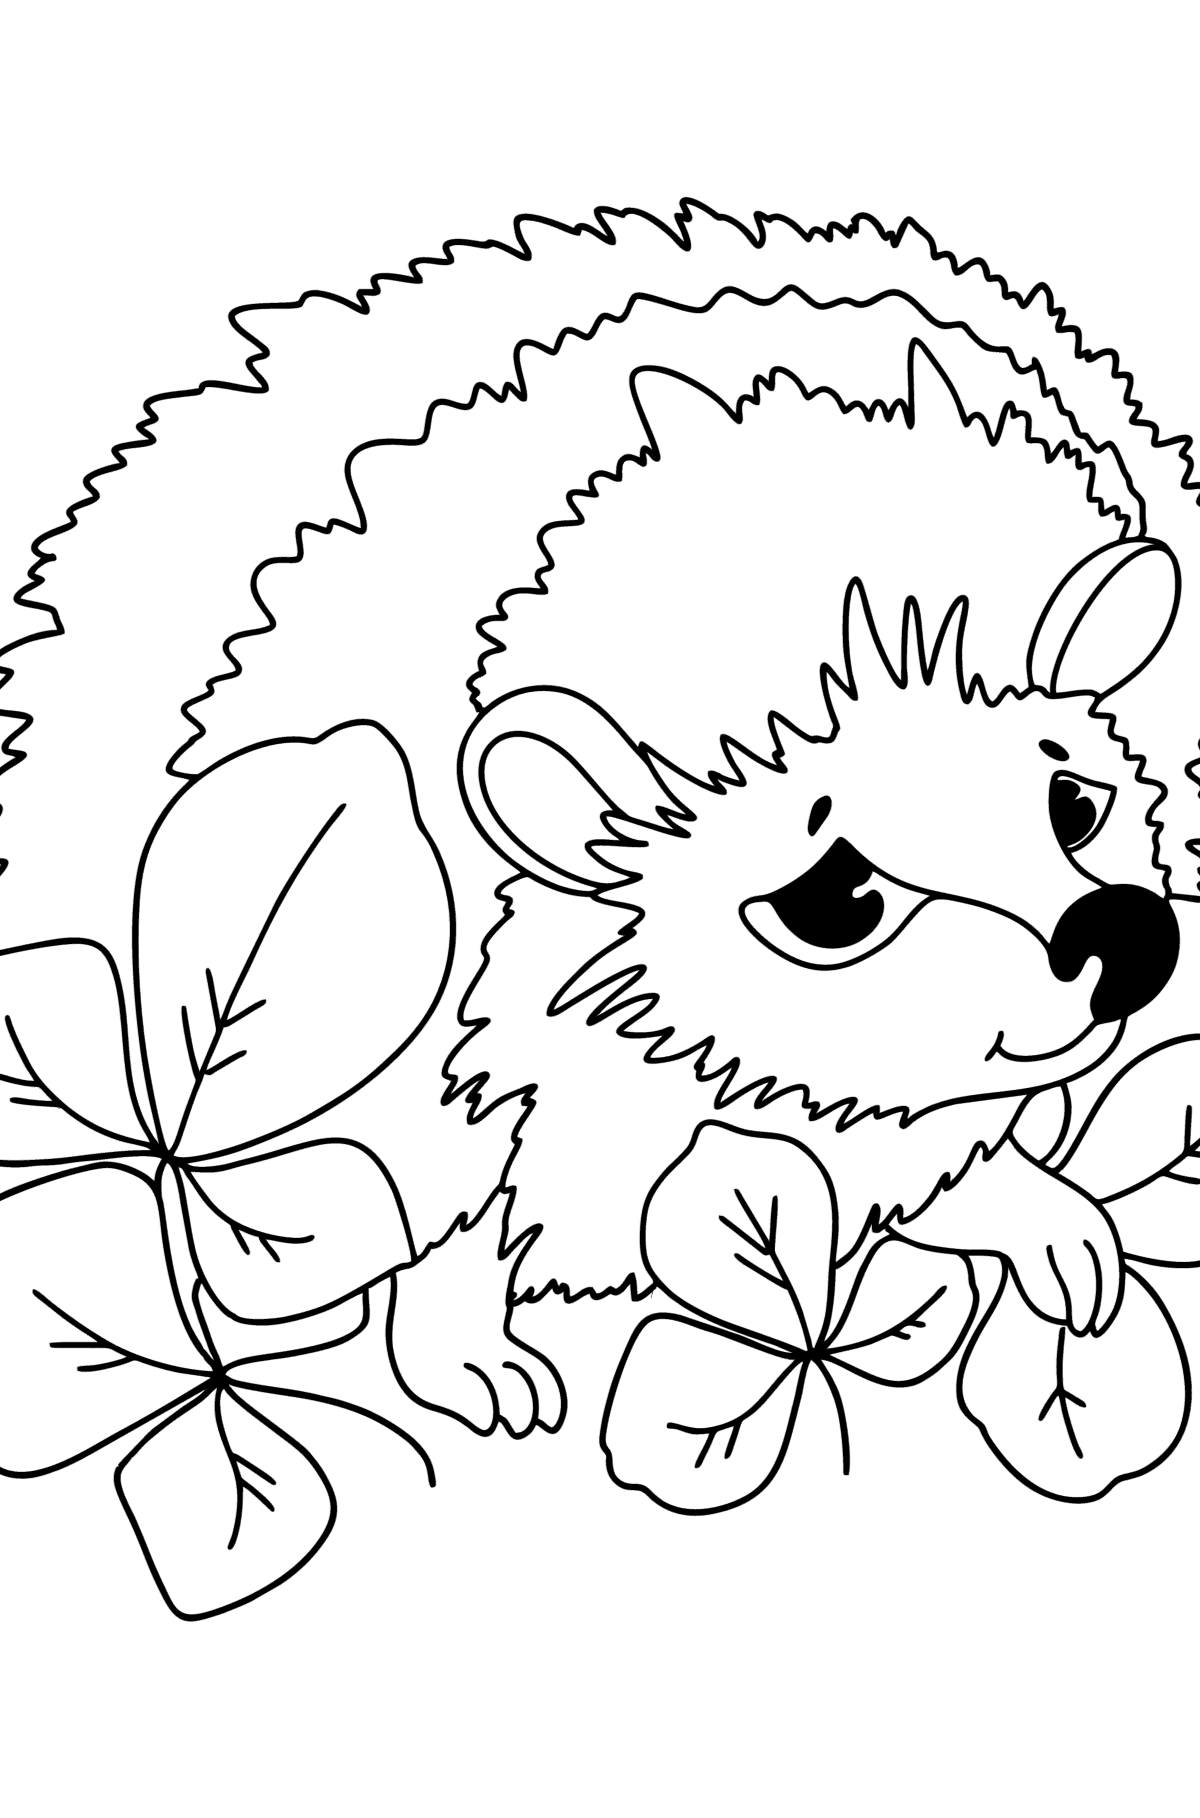 Cute hedgehog сoloring page - Coloring Pages for Kids